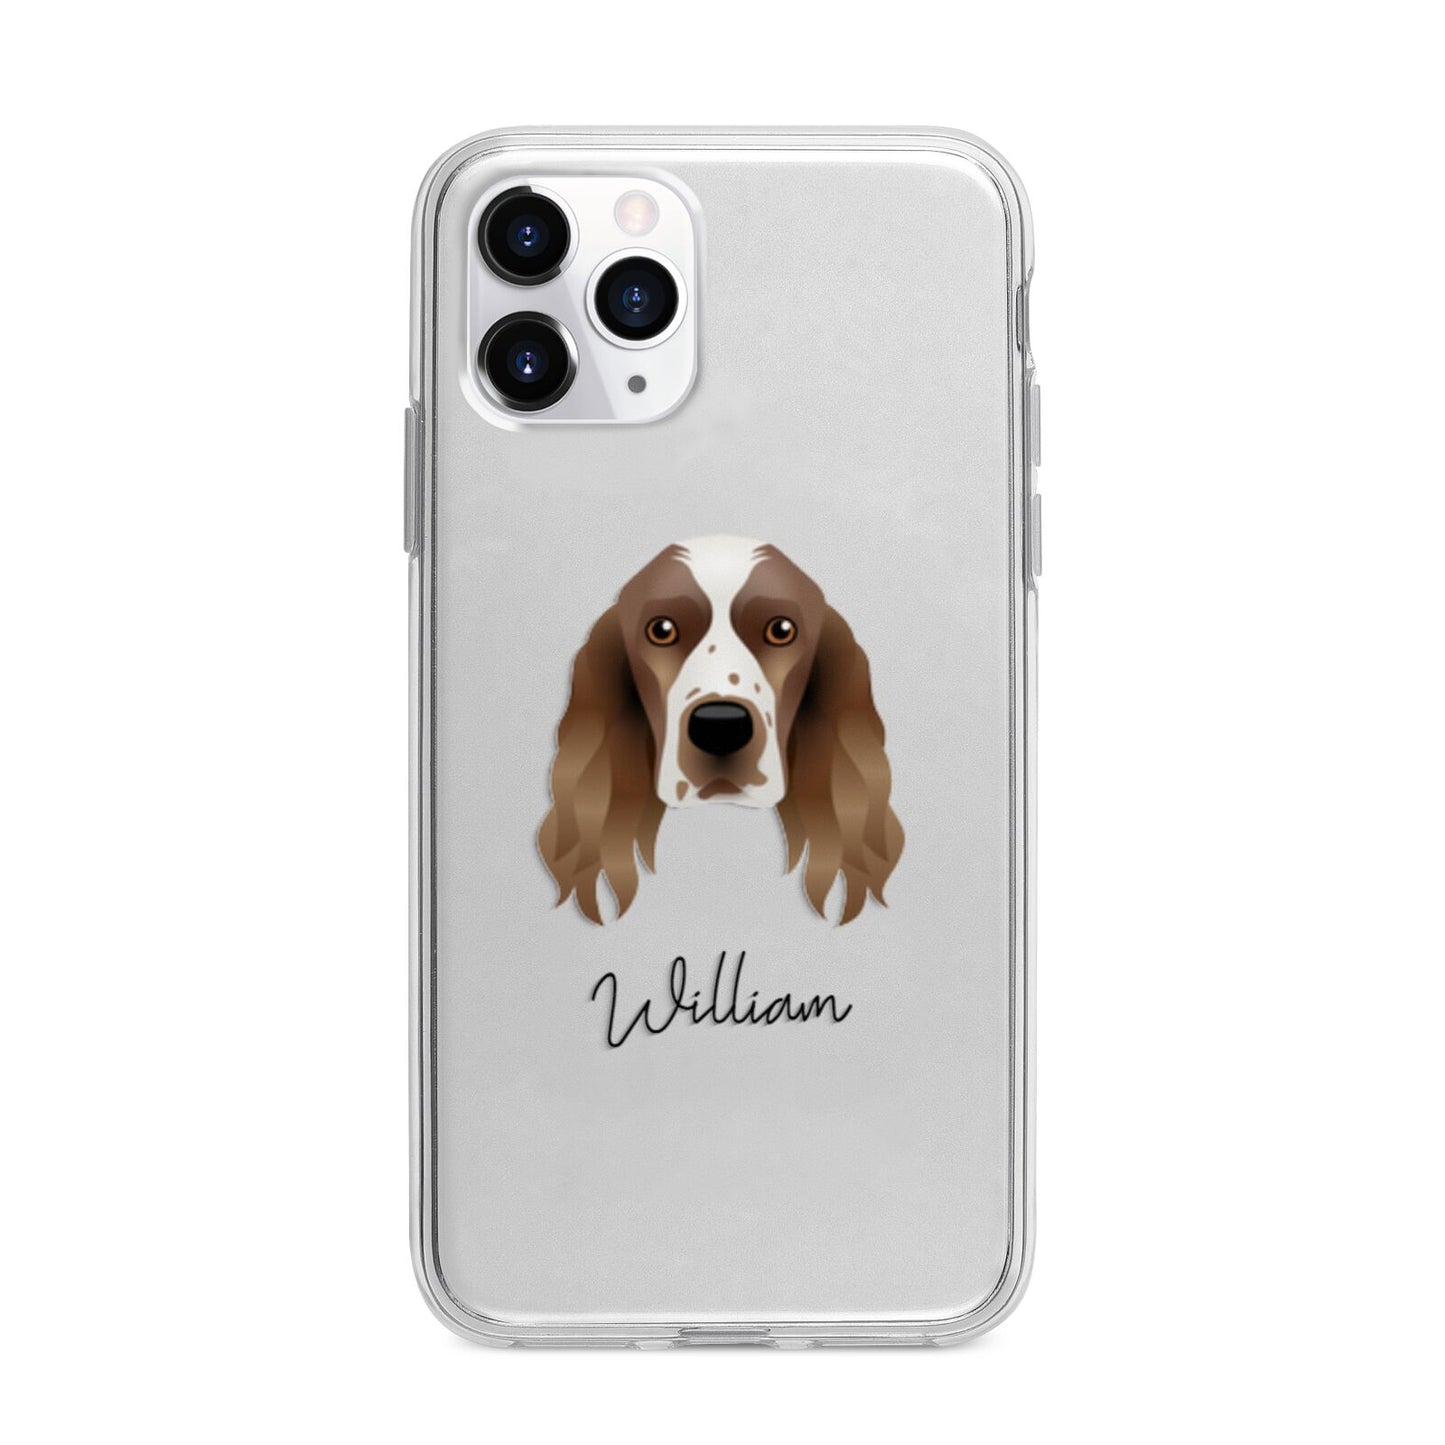 Welsh Springer Spaniel Personalised Apple iPhone 11 Pro Max in Silver with Bumper Case